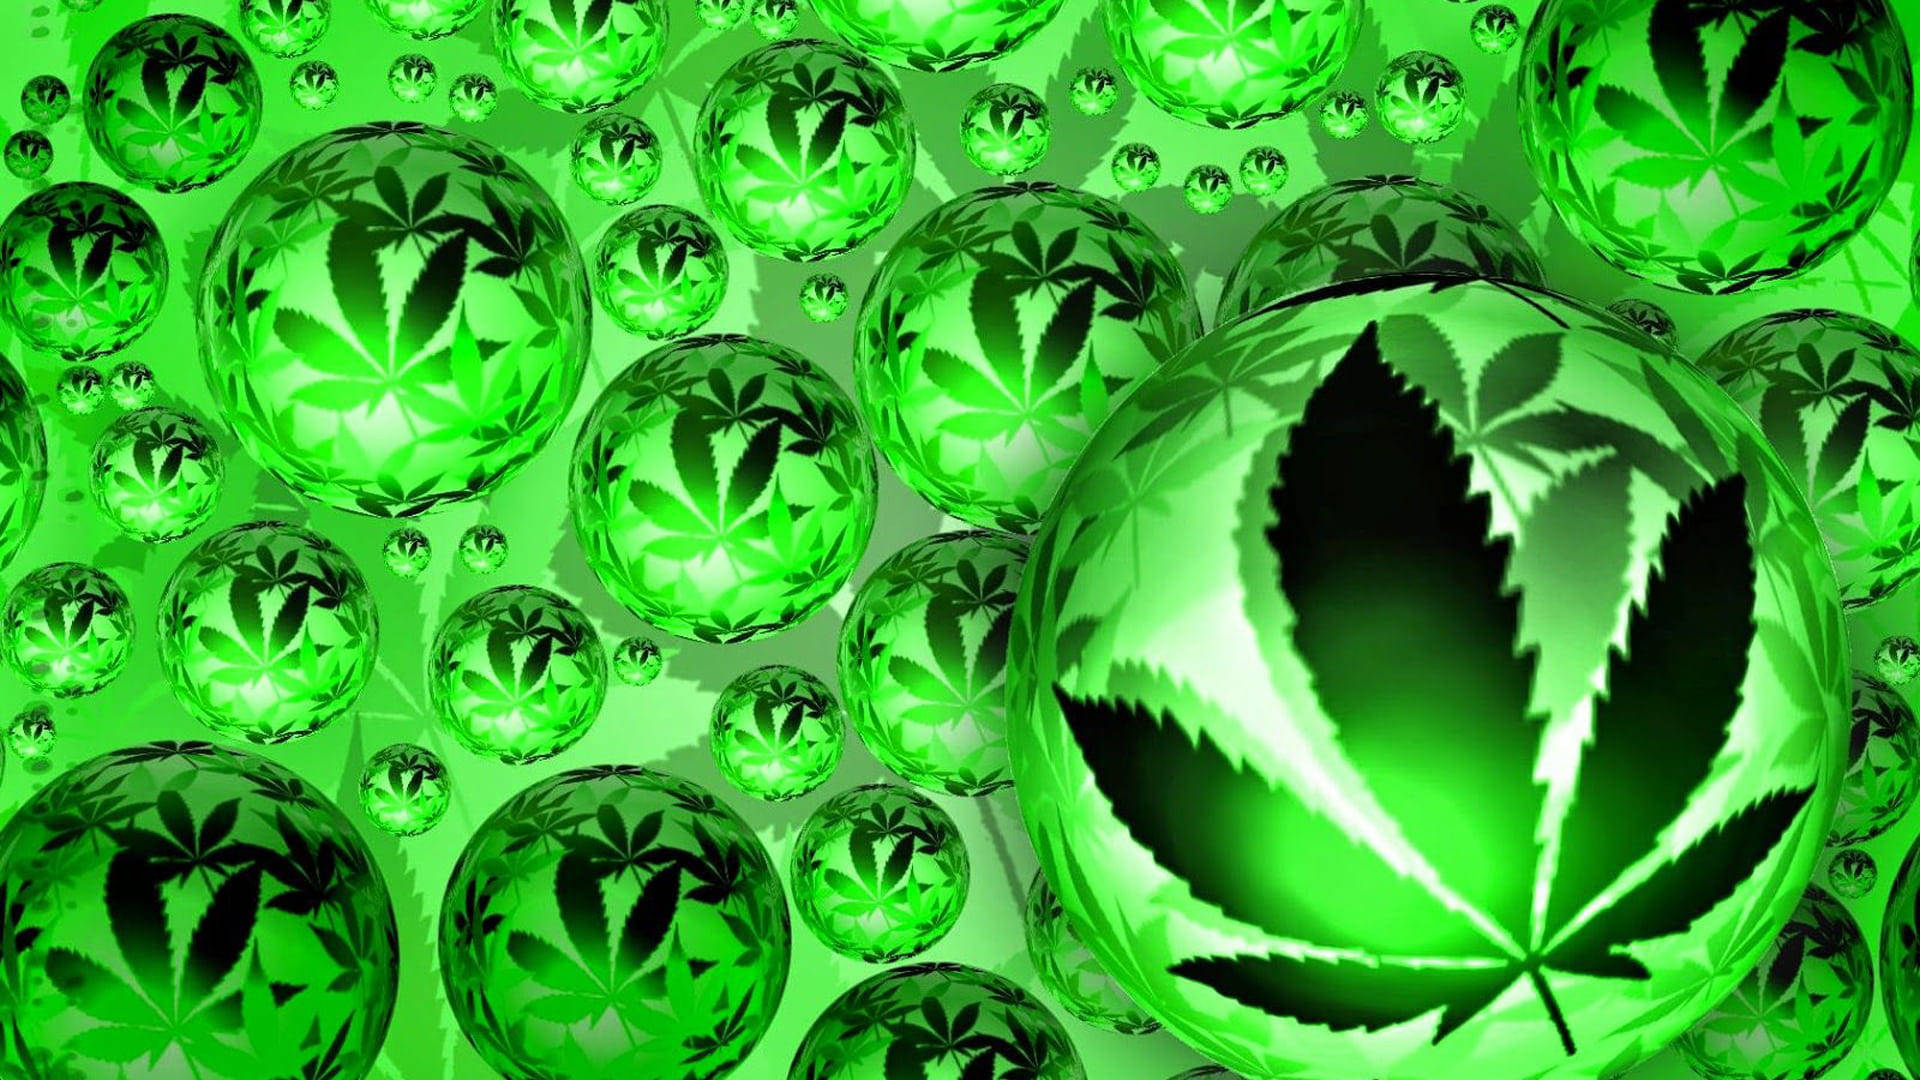 Cool Weed Inside Green Bubbles Background